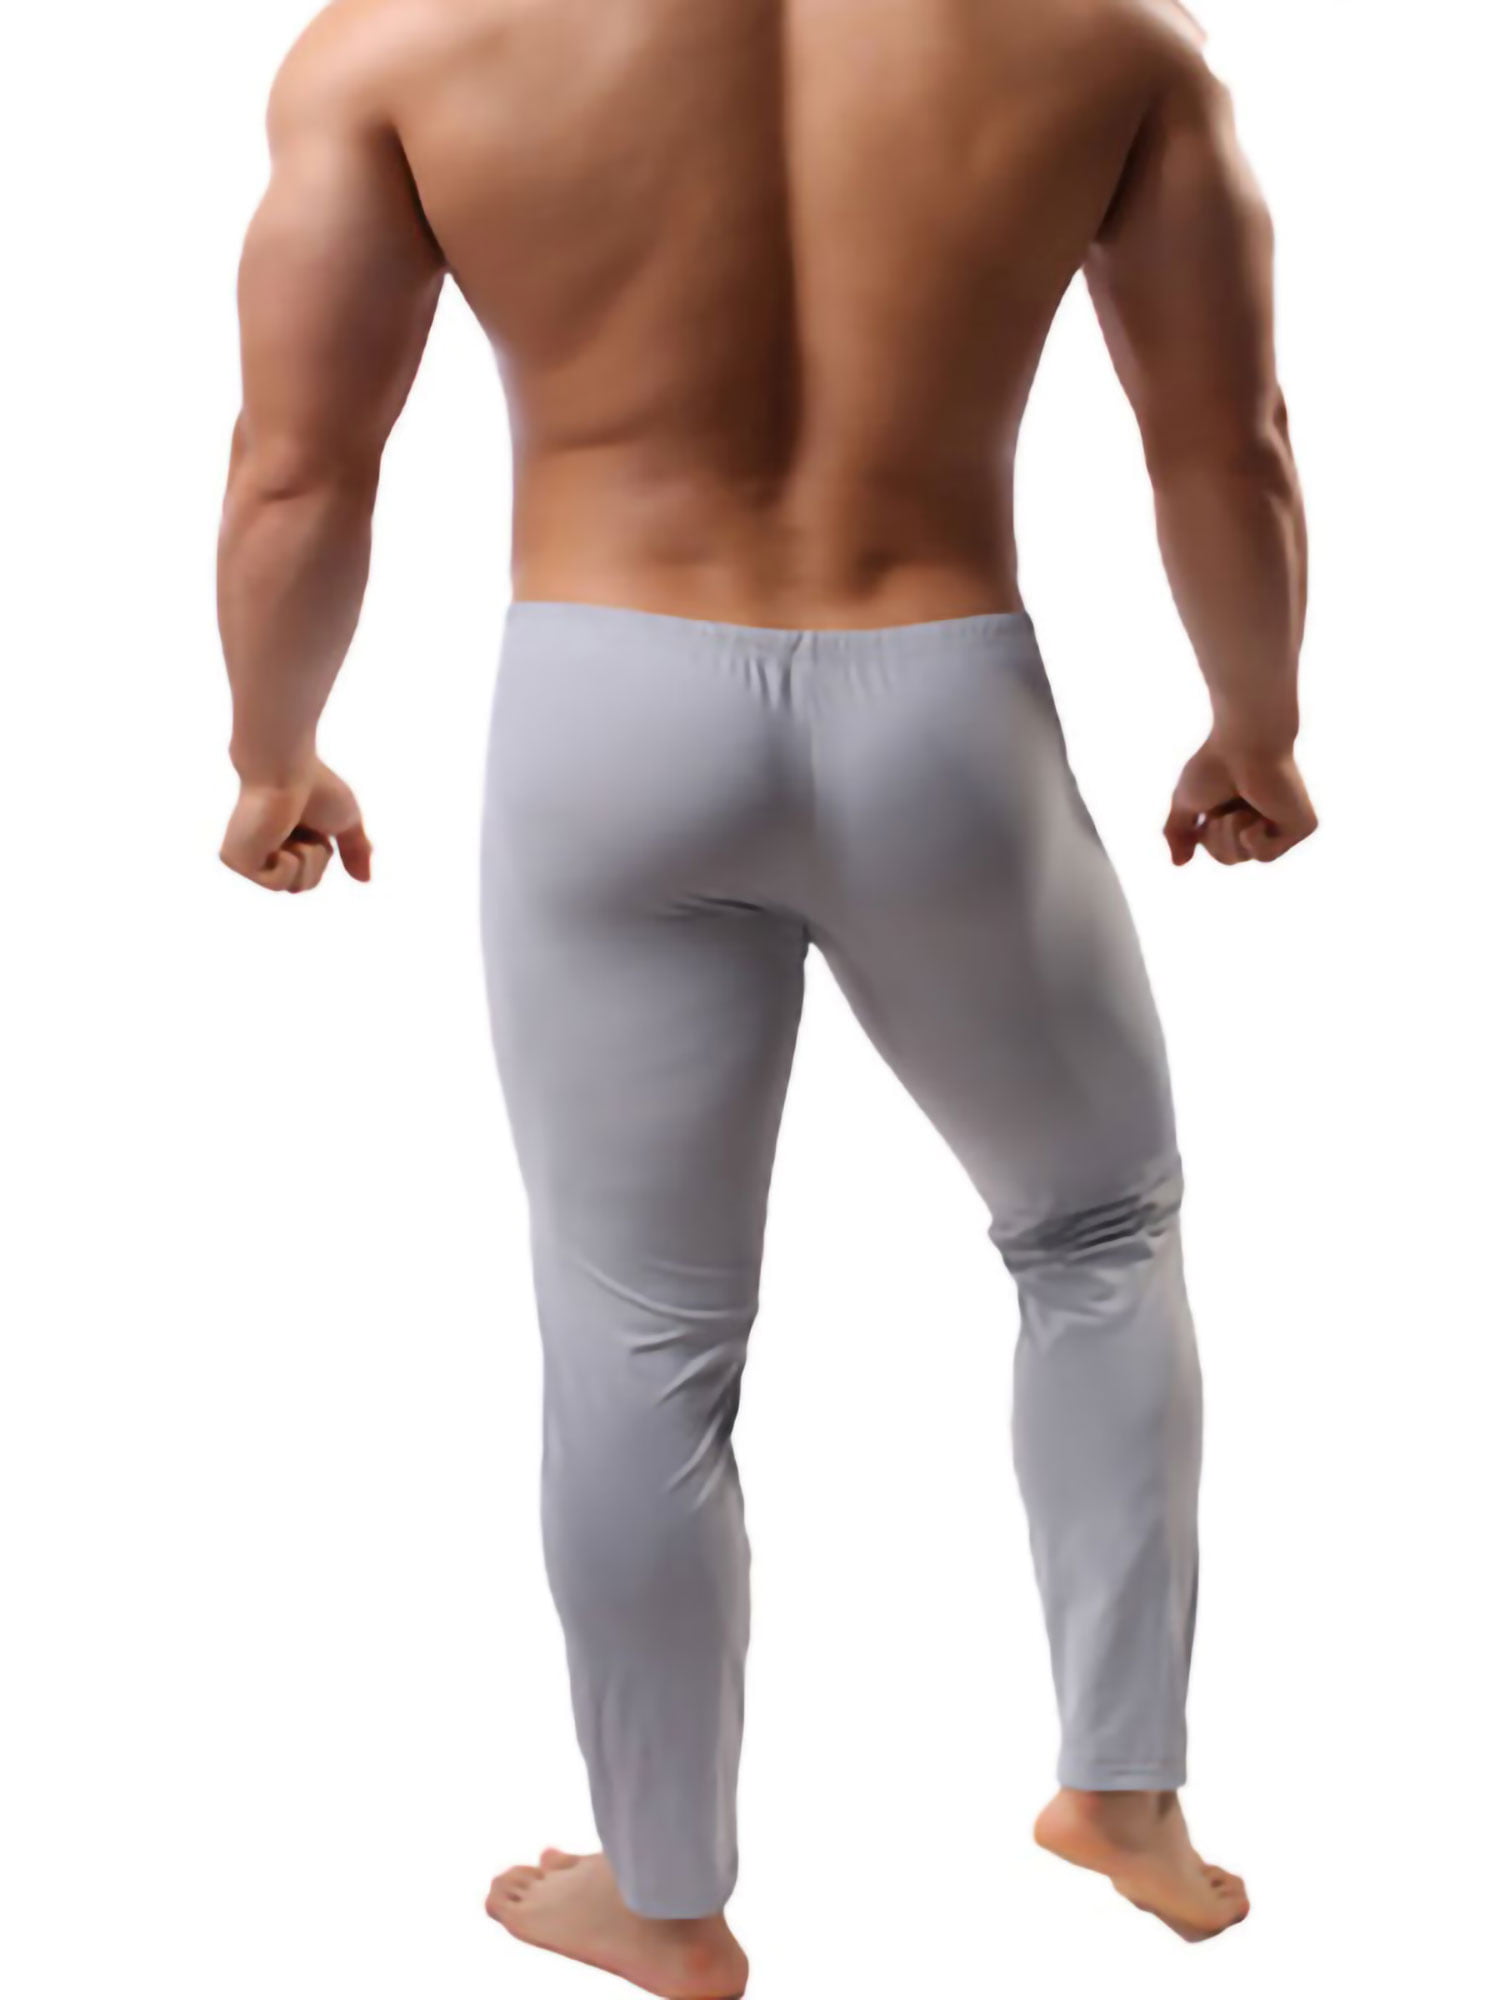 HOM long johns base layer Business HO1 inners PJ bottoms Underwear thermal pant